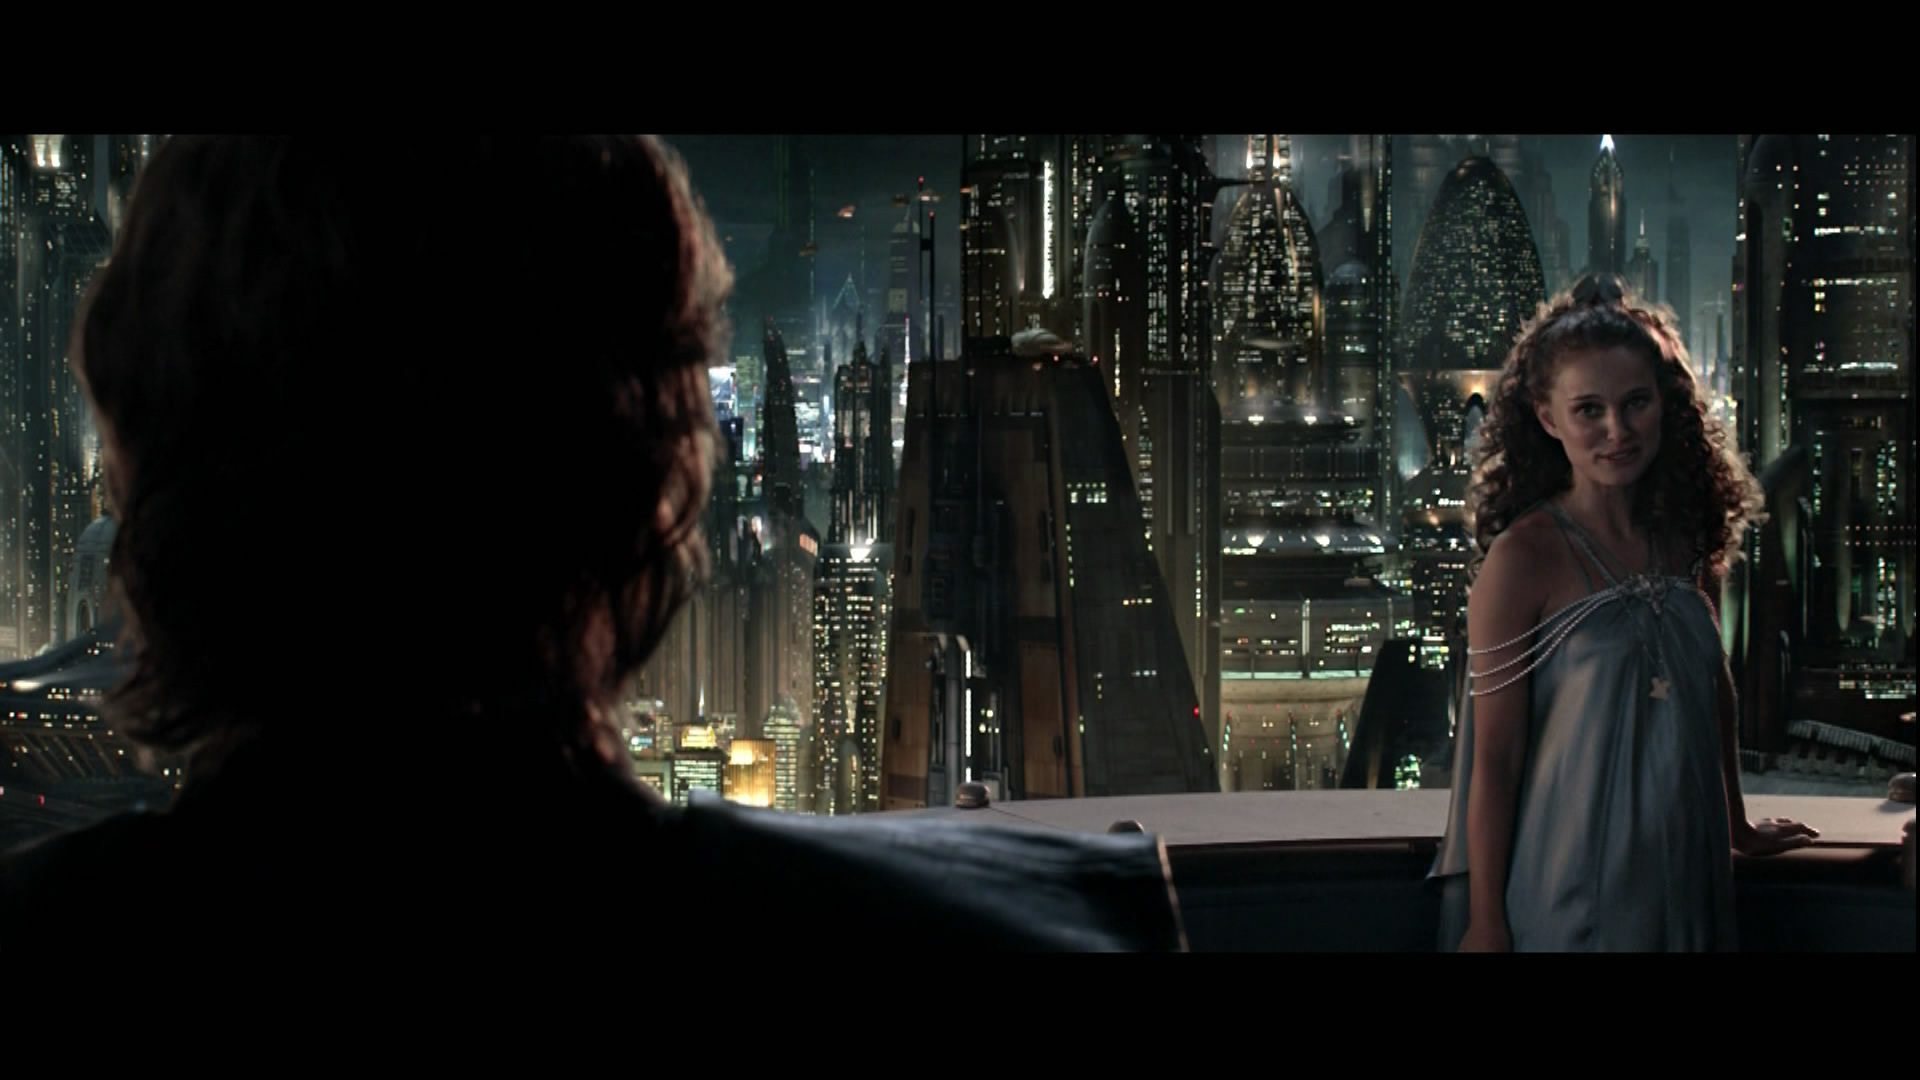 Star Wars: Anakin sees Padmé on a balcony with a view to a splendorous city